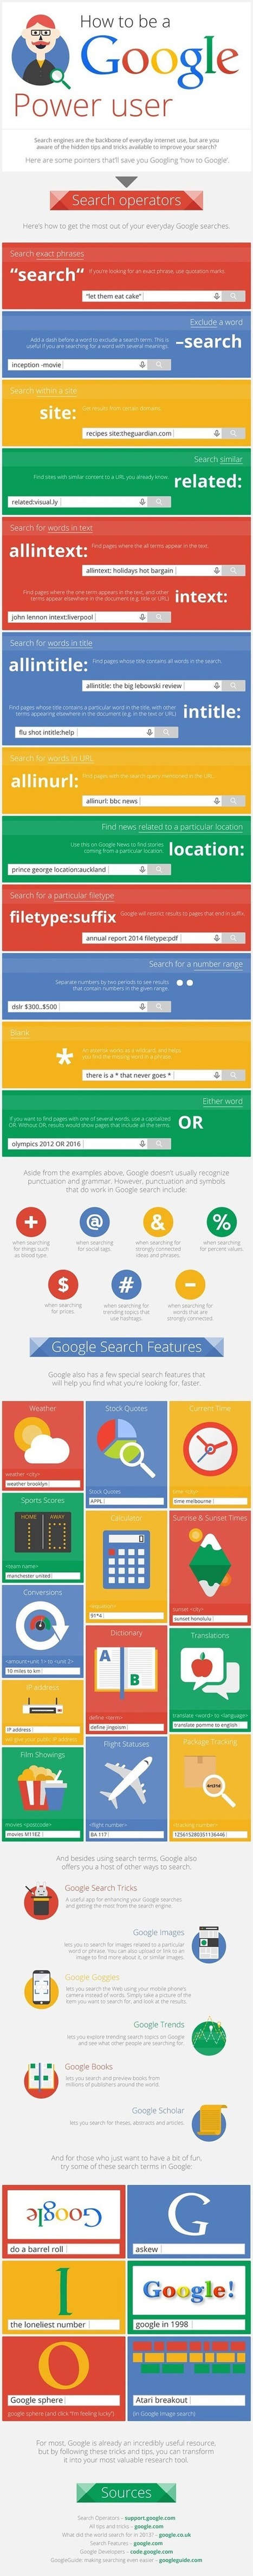 46 Hidden Tips and Tricks to Use Google Search Like a Boss: Infographic | digital marketing strategy | Scoop.it